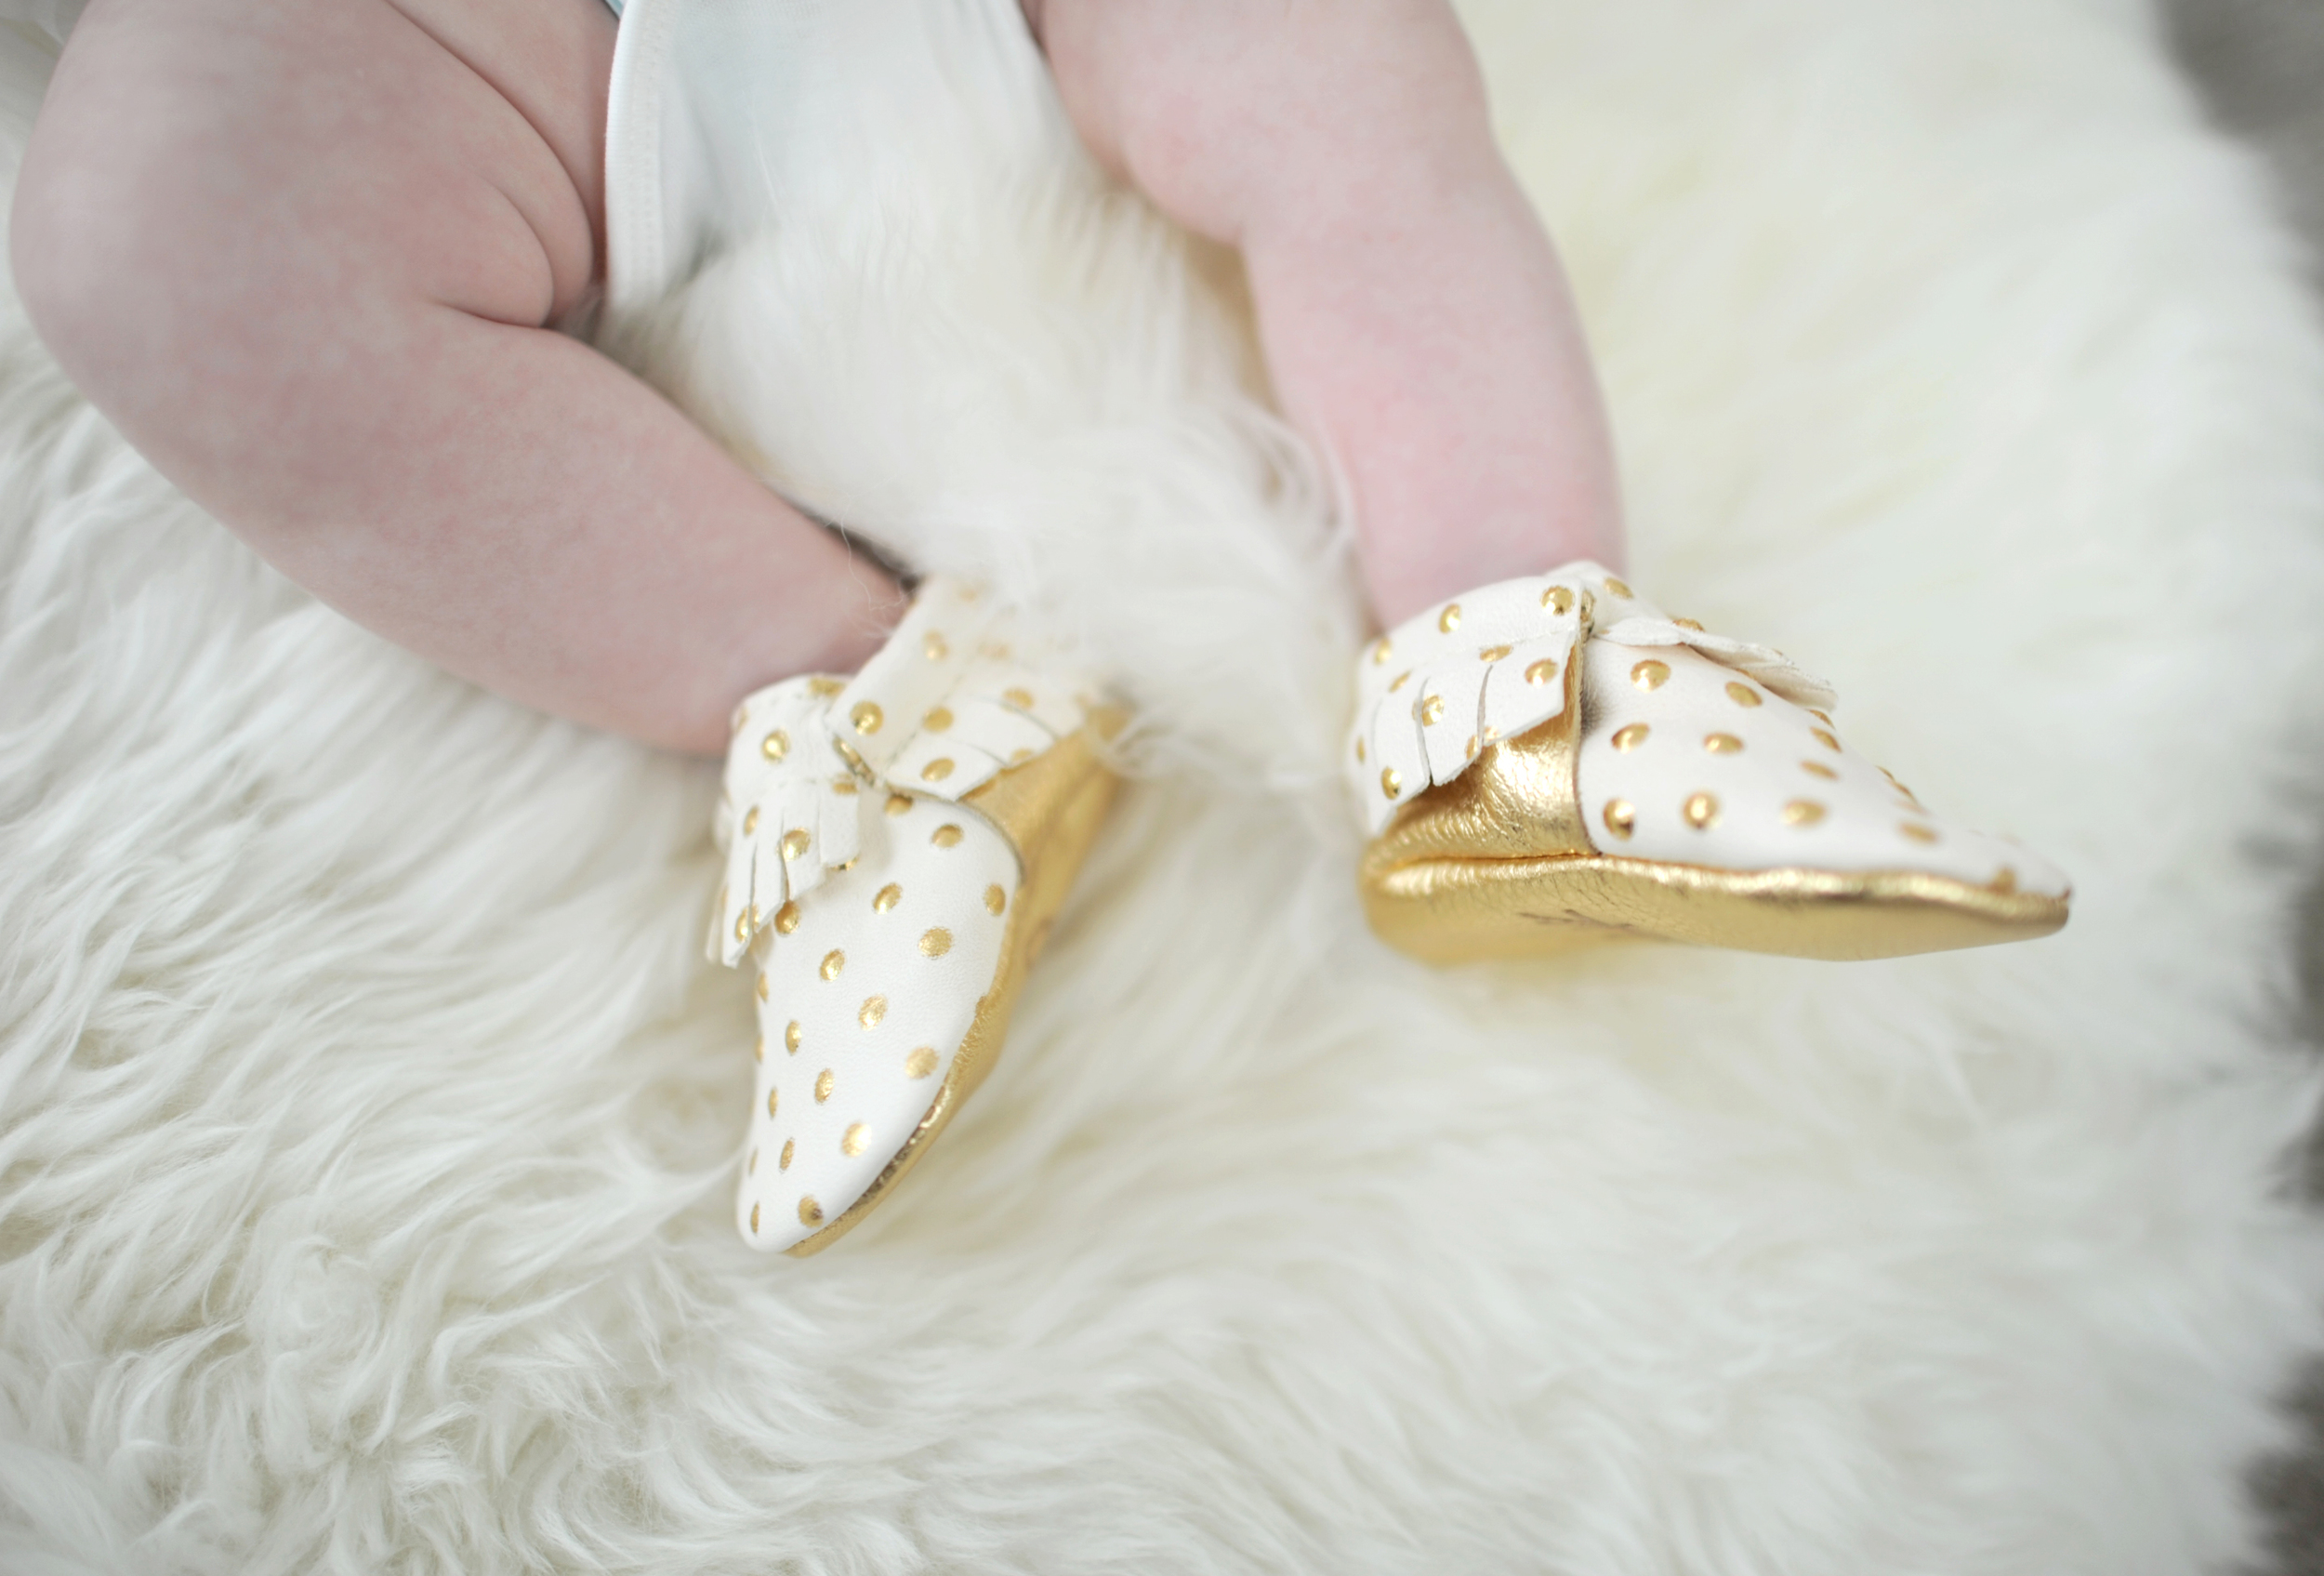 Baby Moccasins - 204 Park